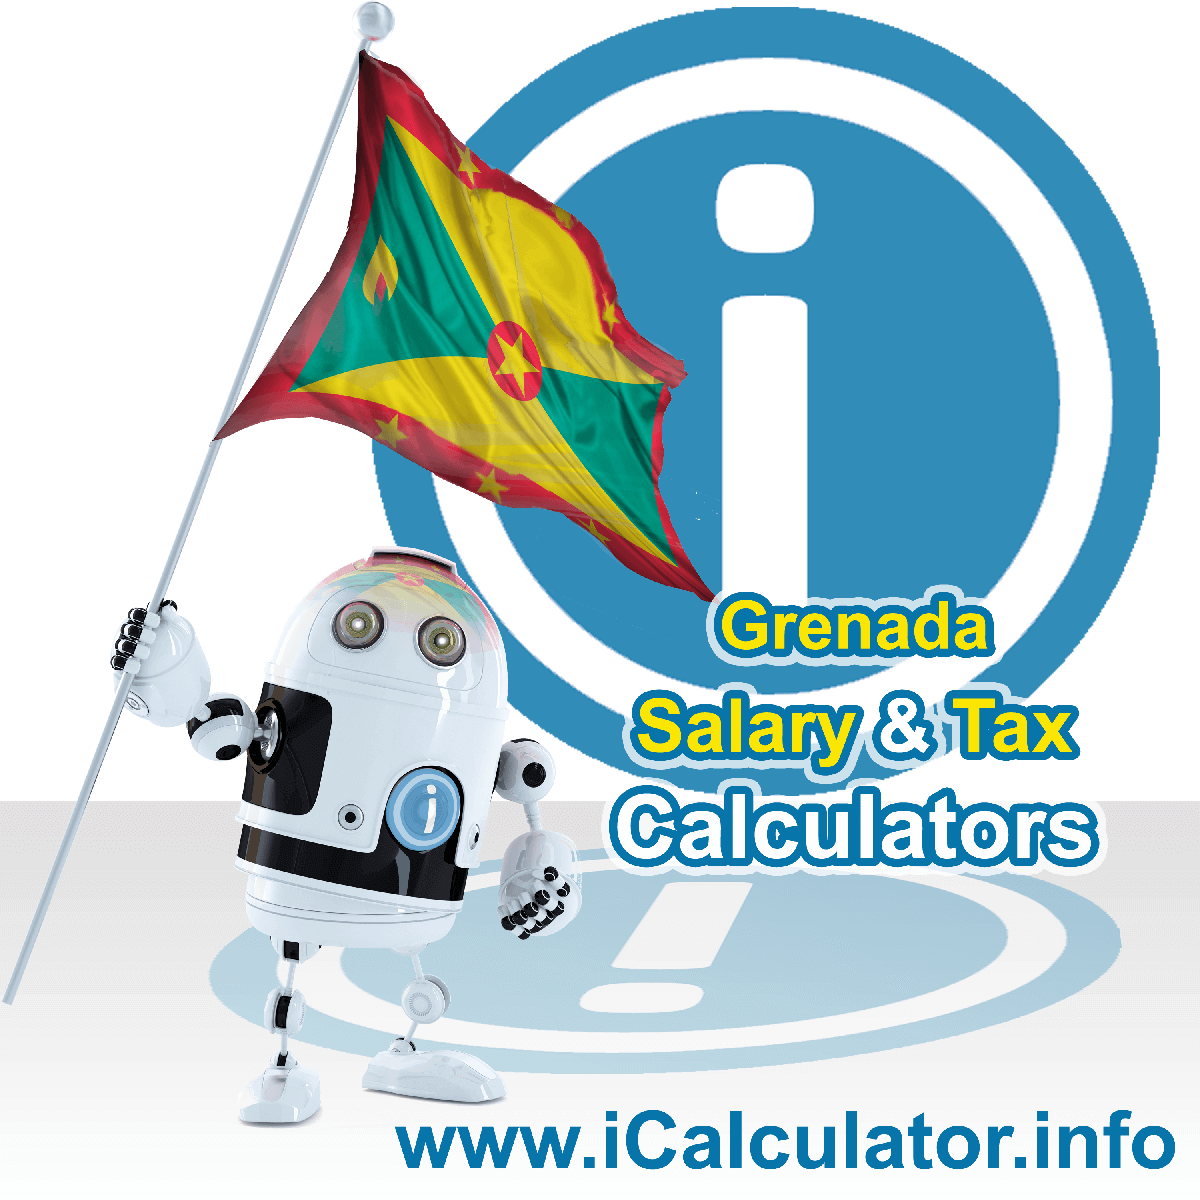 Grenada Salary Calculator. This image shows the Grenadaese flag and information relating to the tax formula for the Grenada Tax Calculator